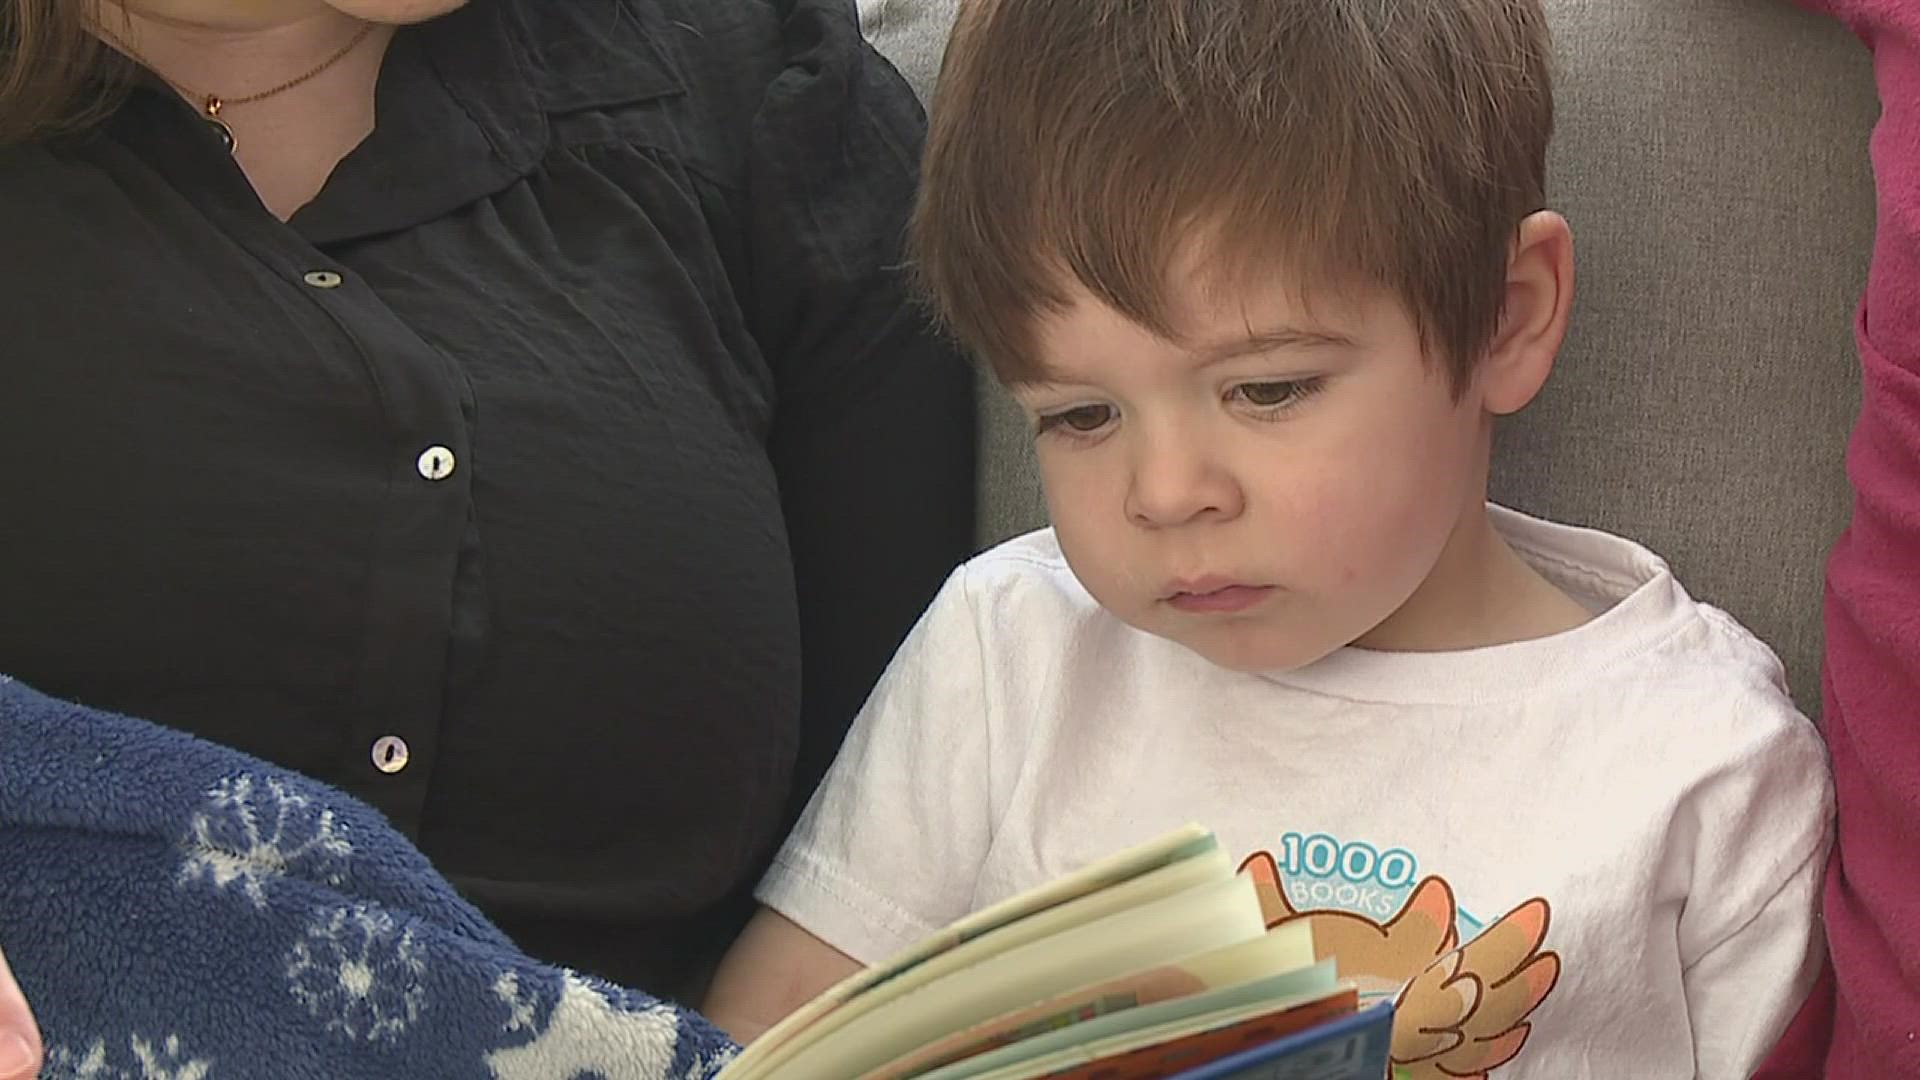 Two-year-old Jack Golden got his library card a year ago. Since then, he's visited the Davenport Public Library over 100 times and read over 1,700 books.